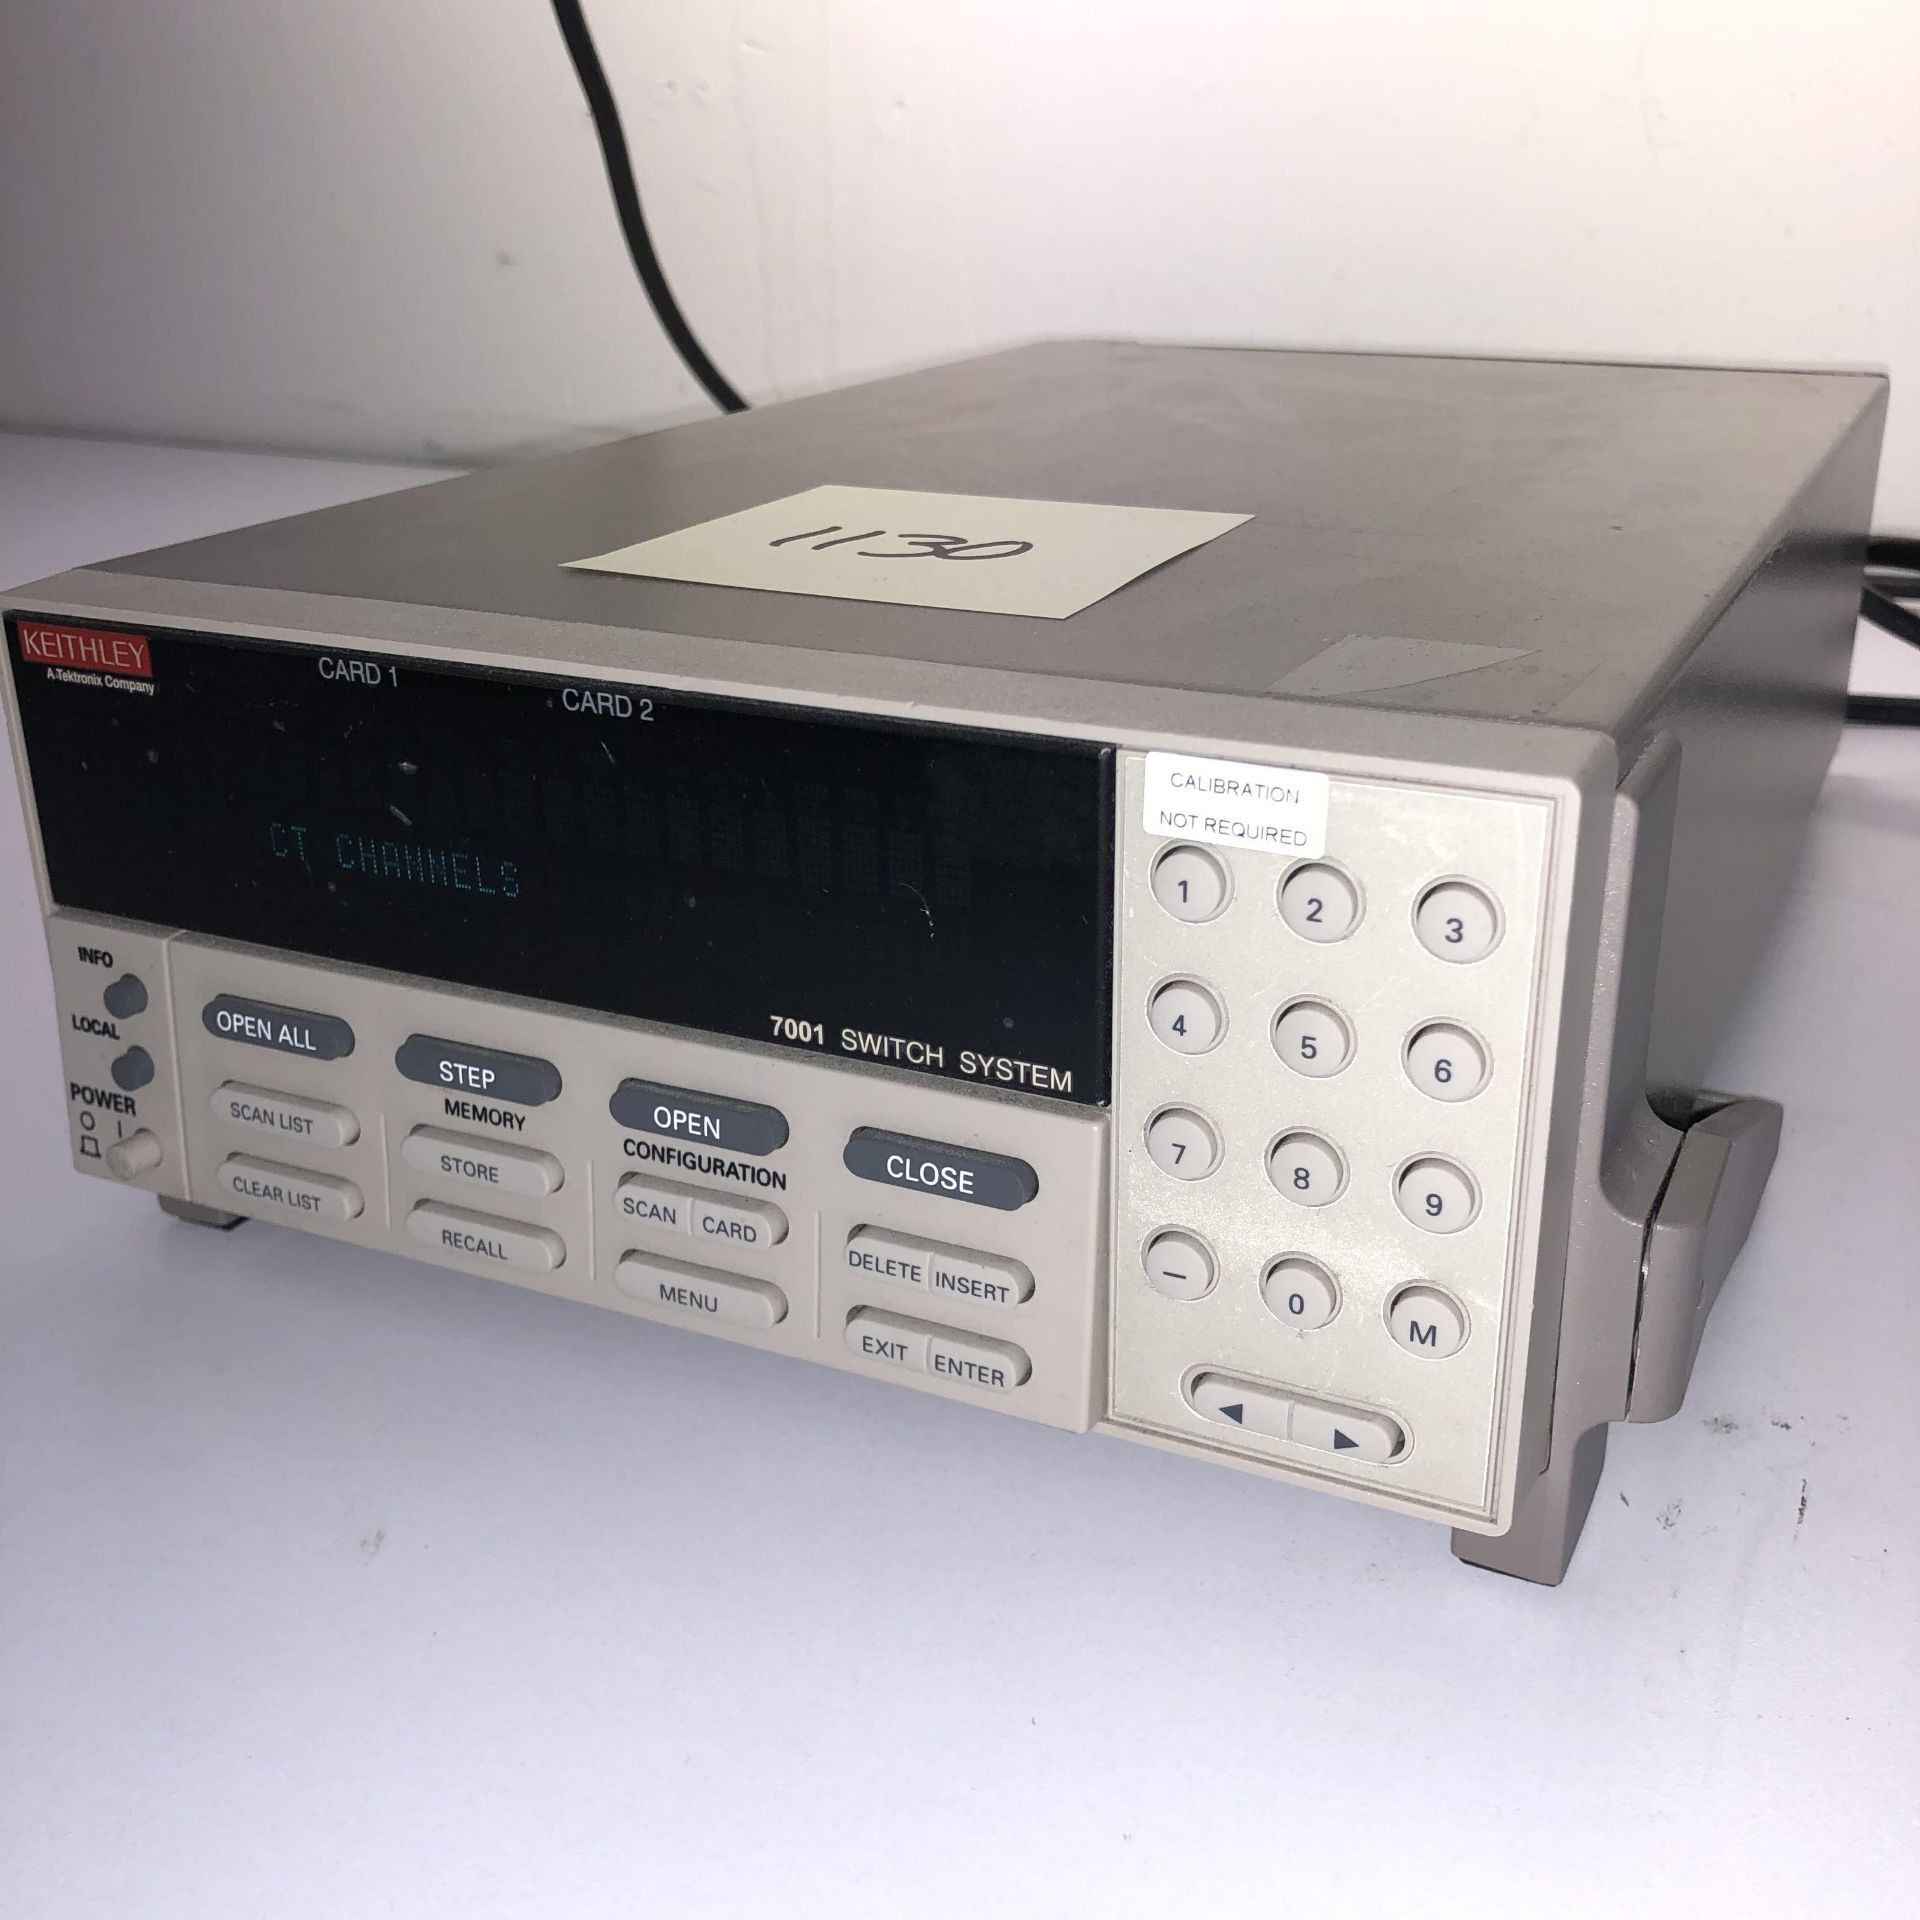 KEITHLEY 7001 SWITCH SYSTEM   1218 Alderwood Ave Sunnyvale, California - Image 5 of 9